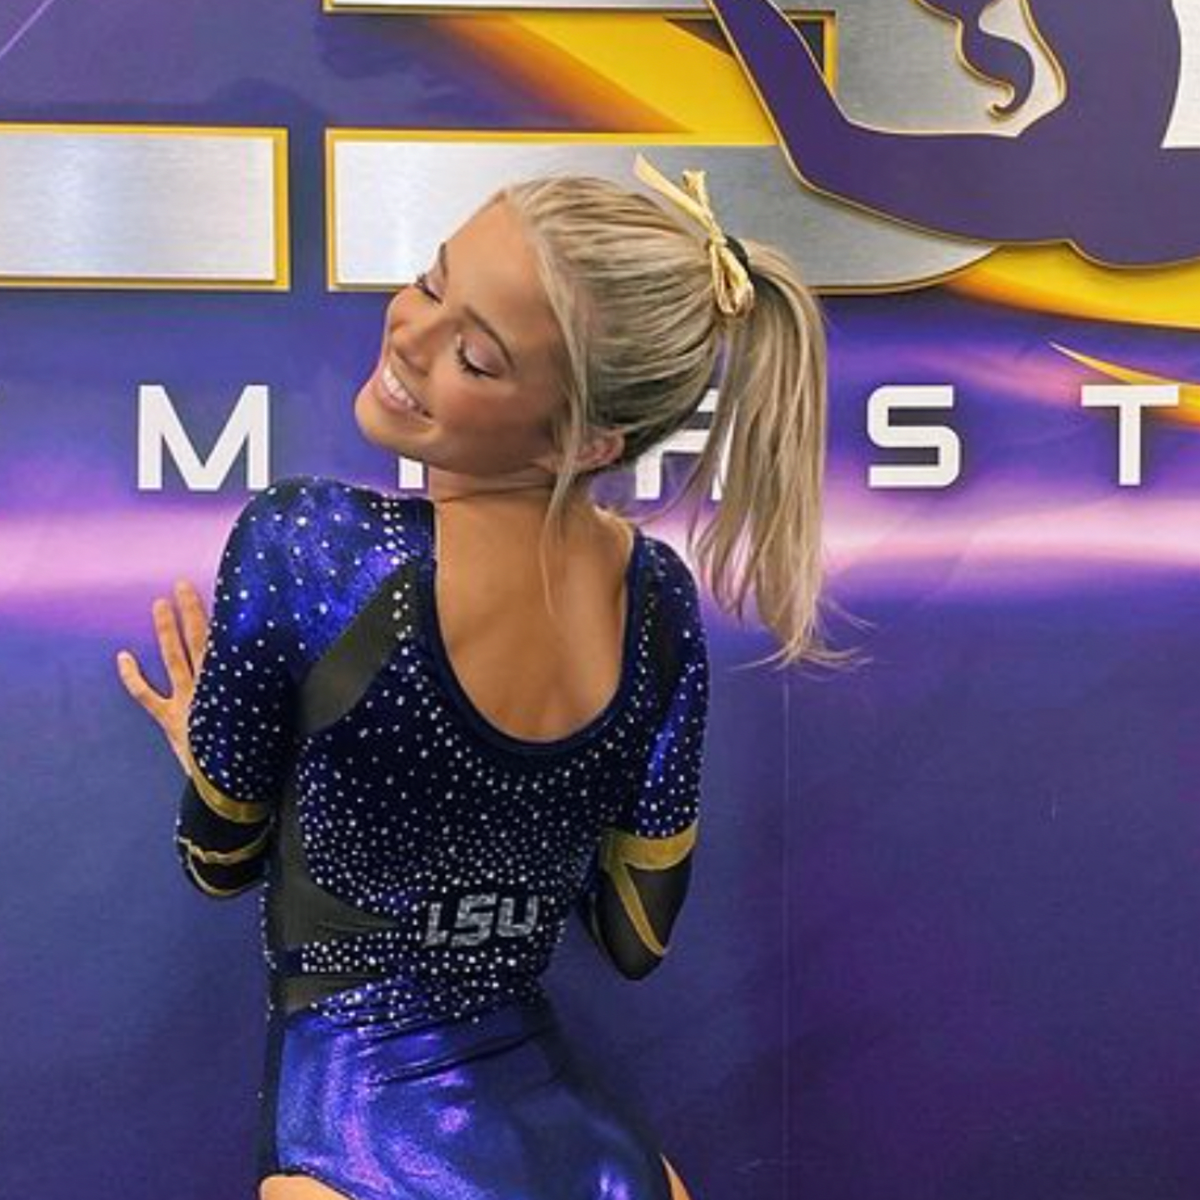 Olivia Dunne's signed LSU leotards sell out within hours for $130